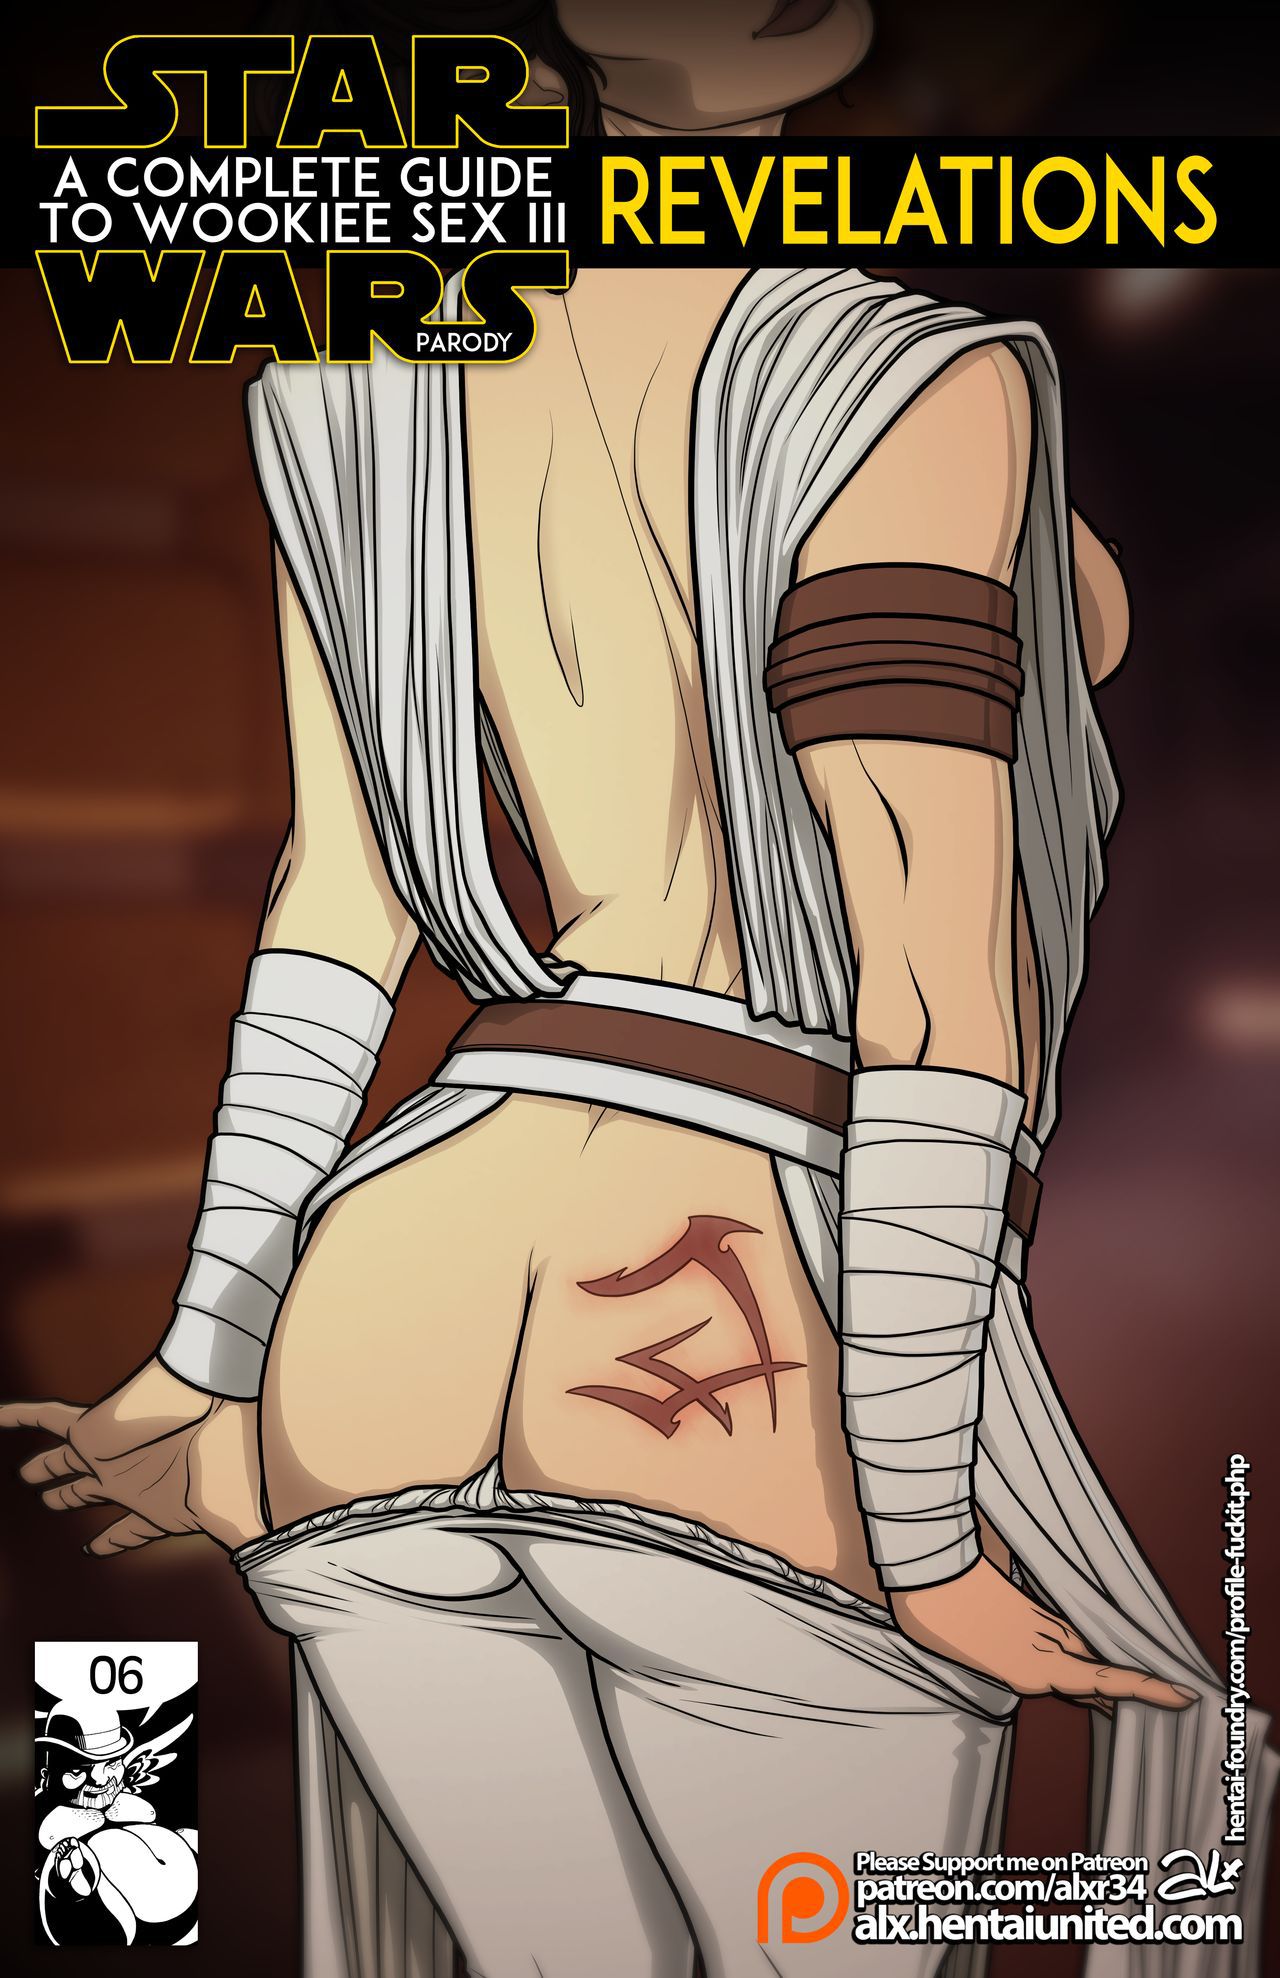 (Alx) Star Wars: A Complete Guide to Wookie Sex III(ongoing) 1